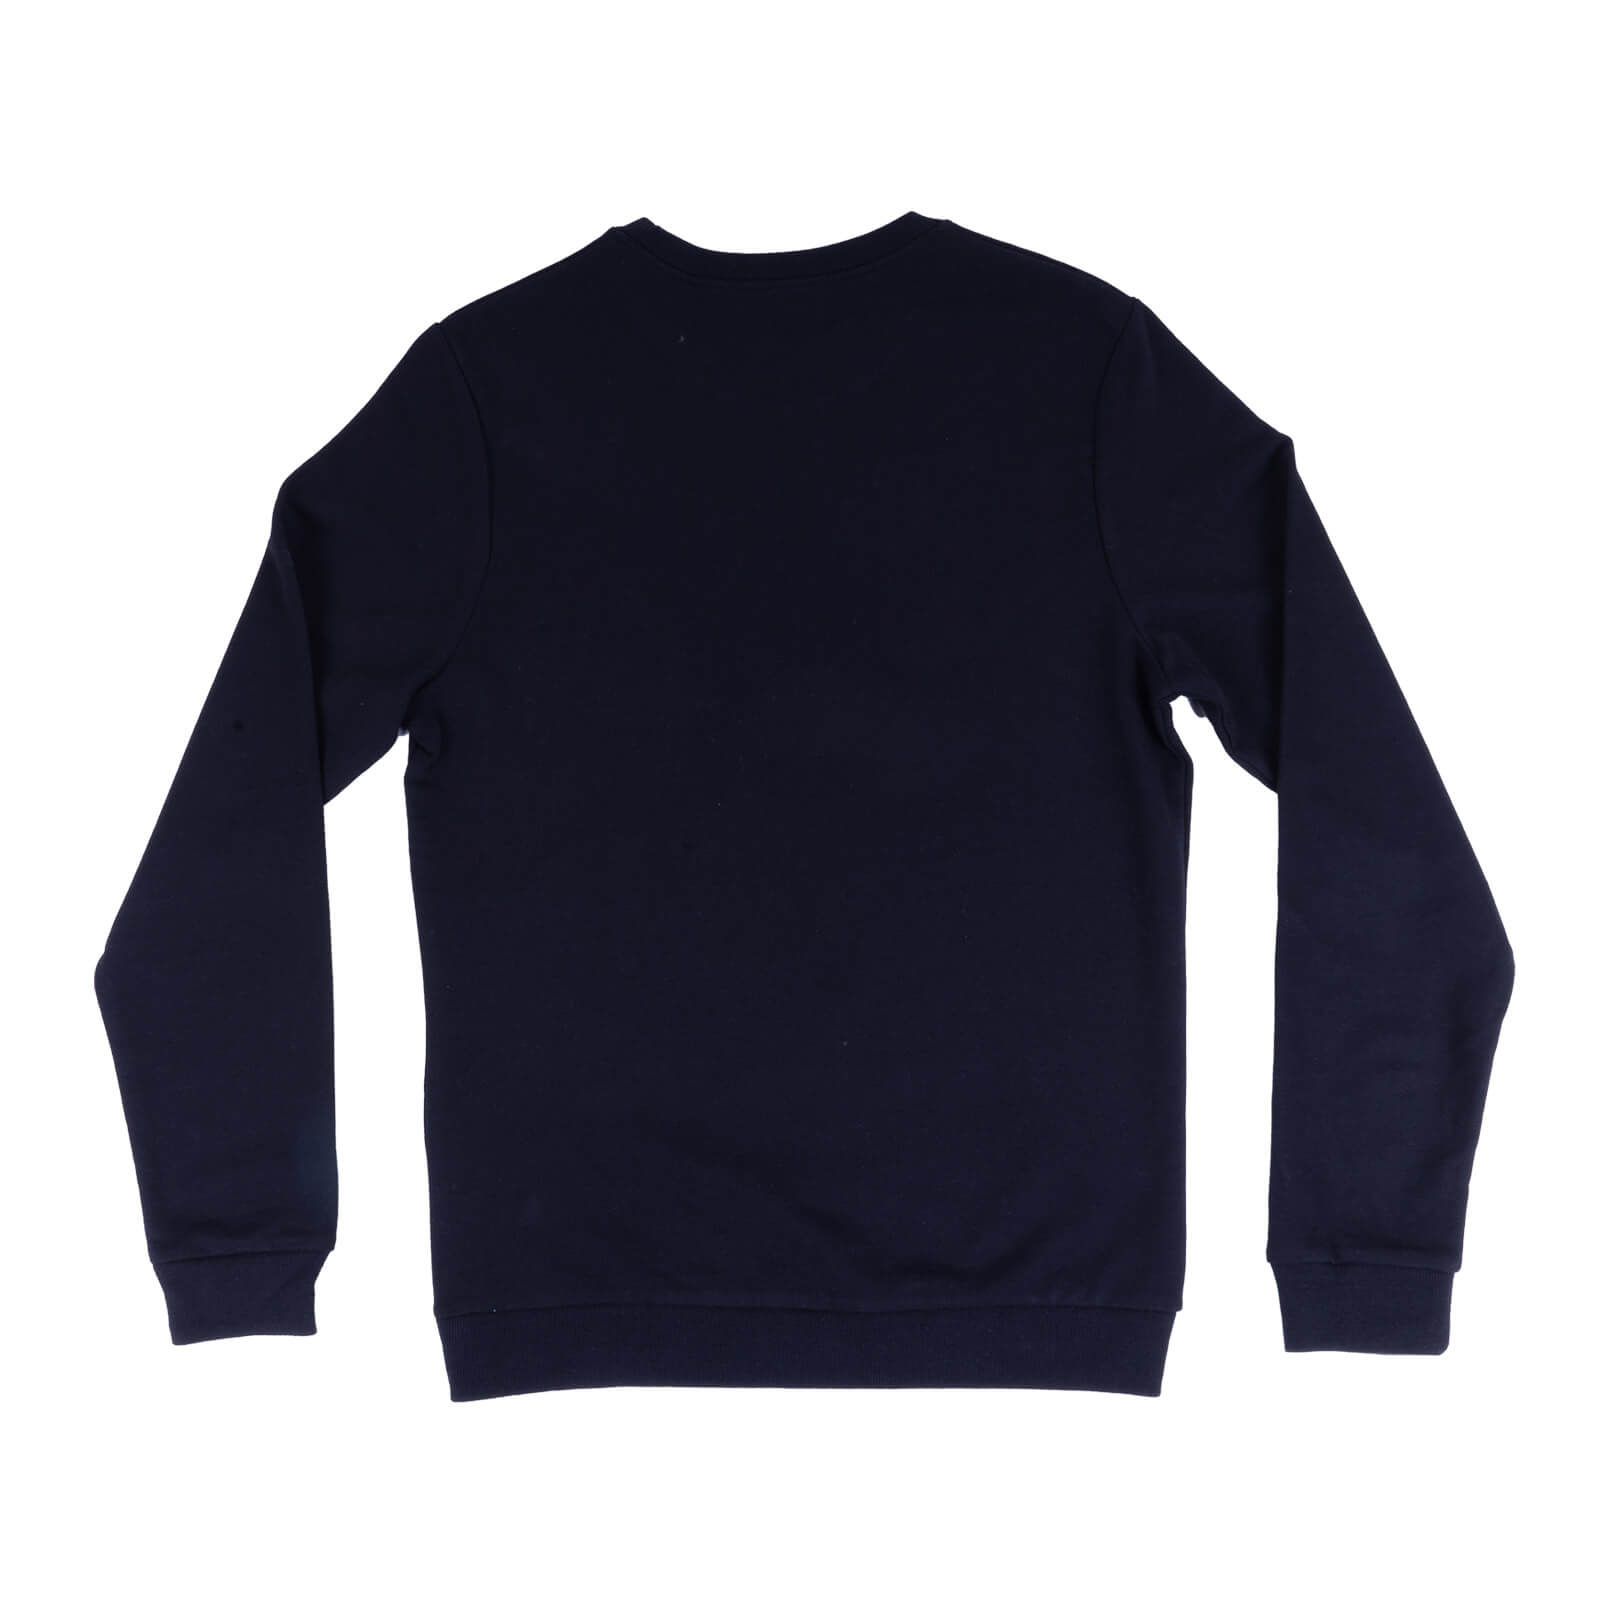 Light sweater, black pure, 80% cotton, 20% polyester